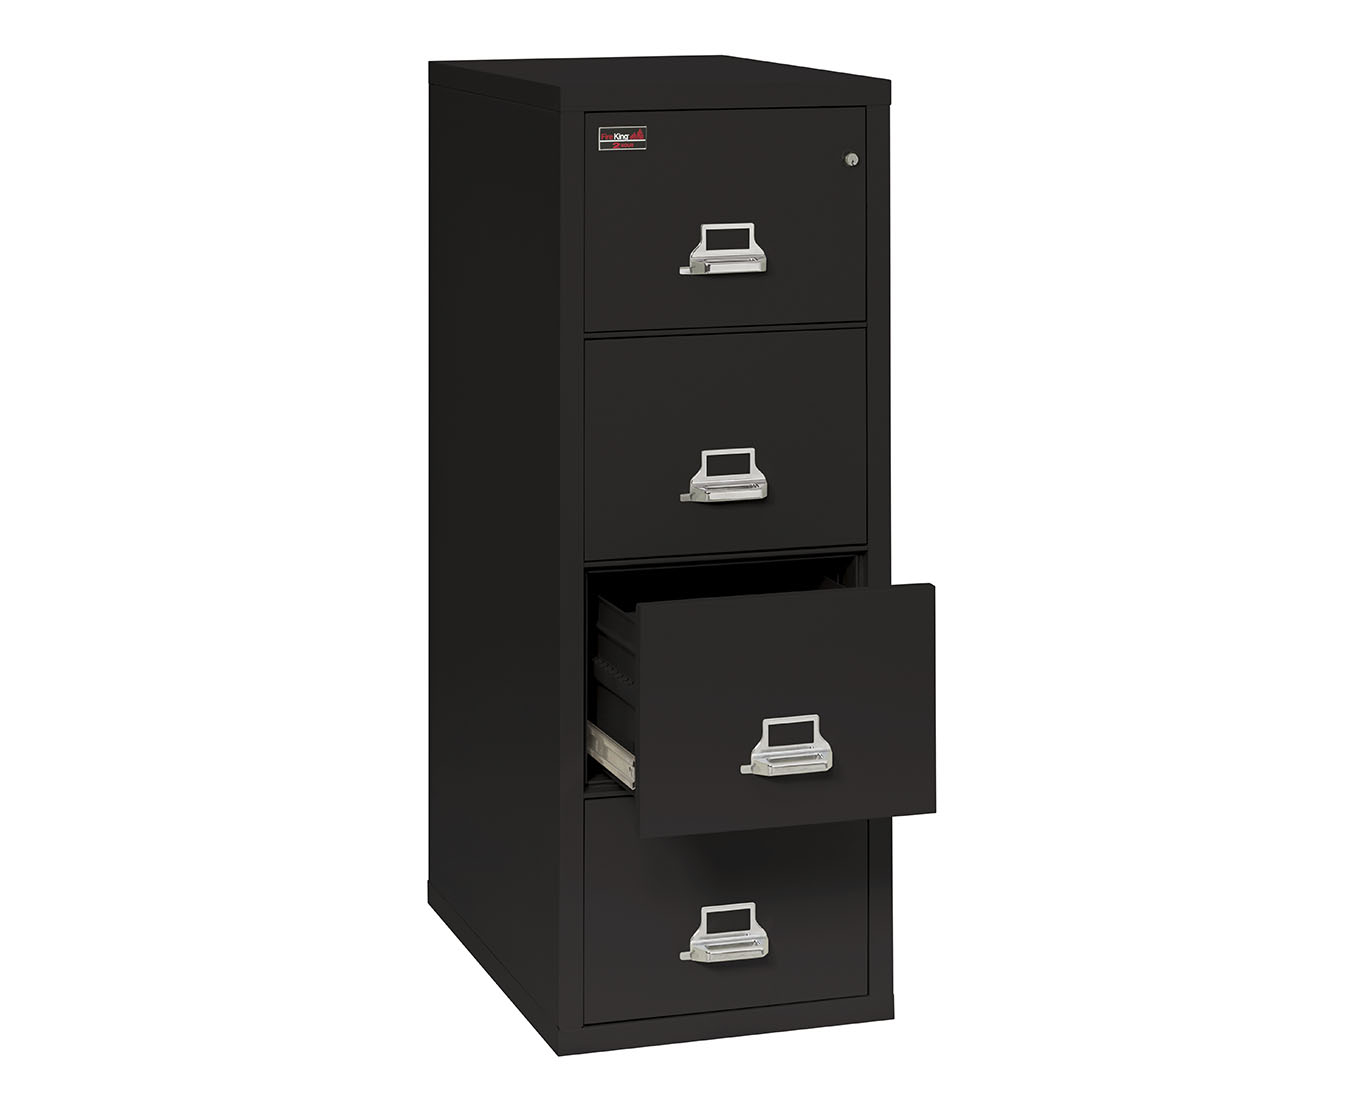 Fireproof File Cabinets 2 Hour Rated Fireking pertaining to measurements 1366 X 1110